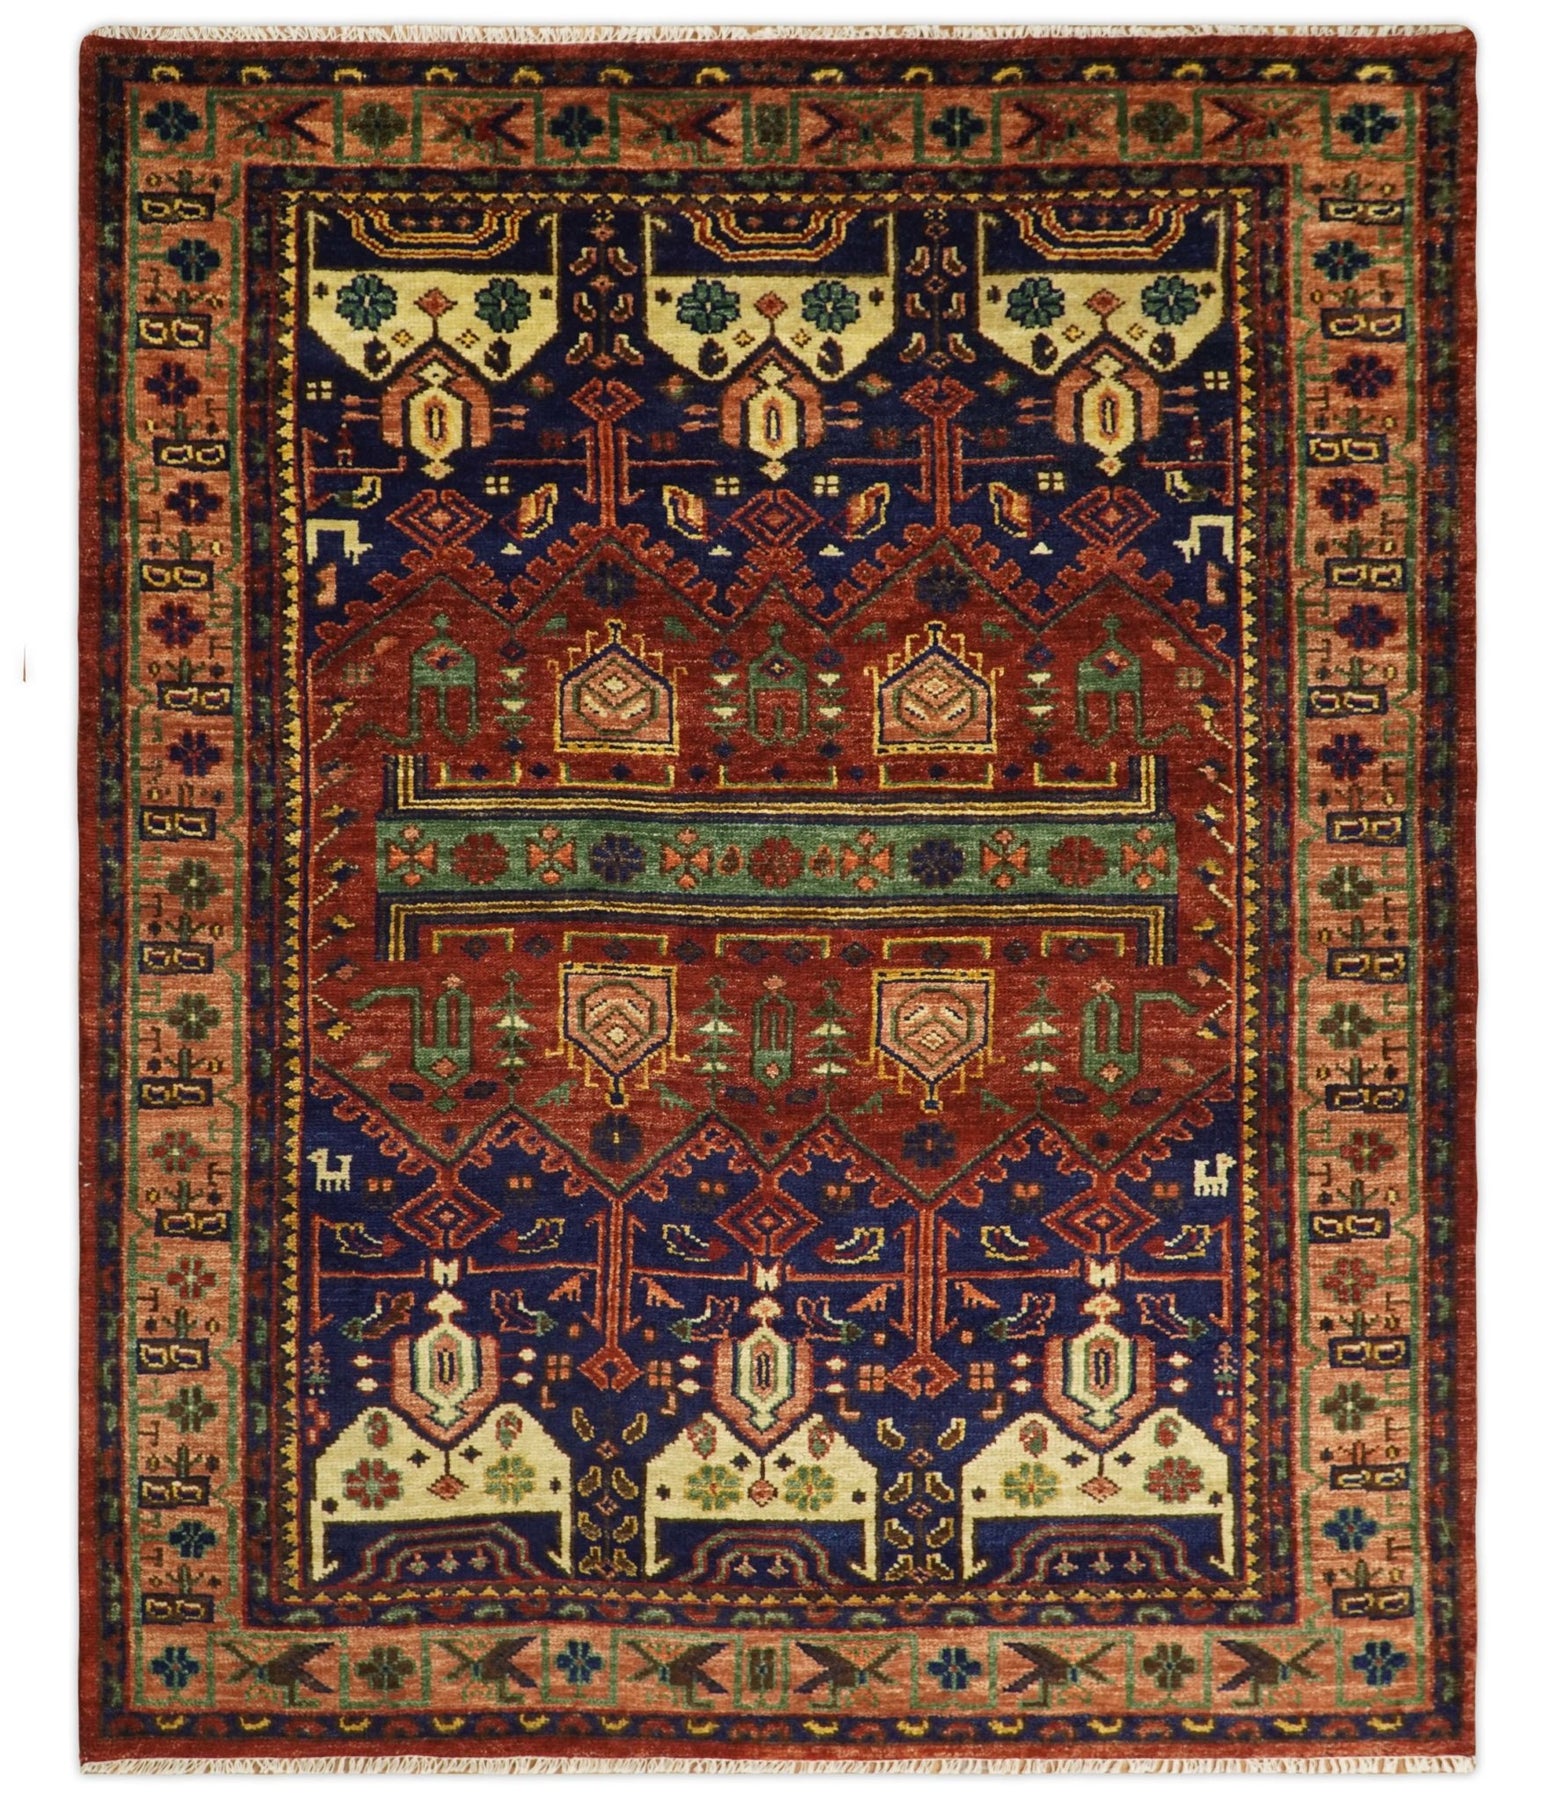 Persian Rugs  Shop Antique Persian Carpets and Iranian Rugs